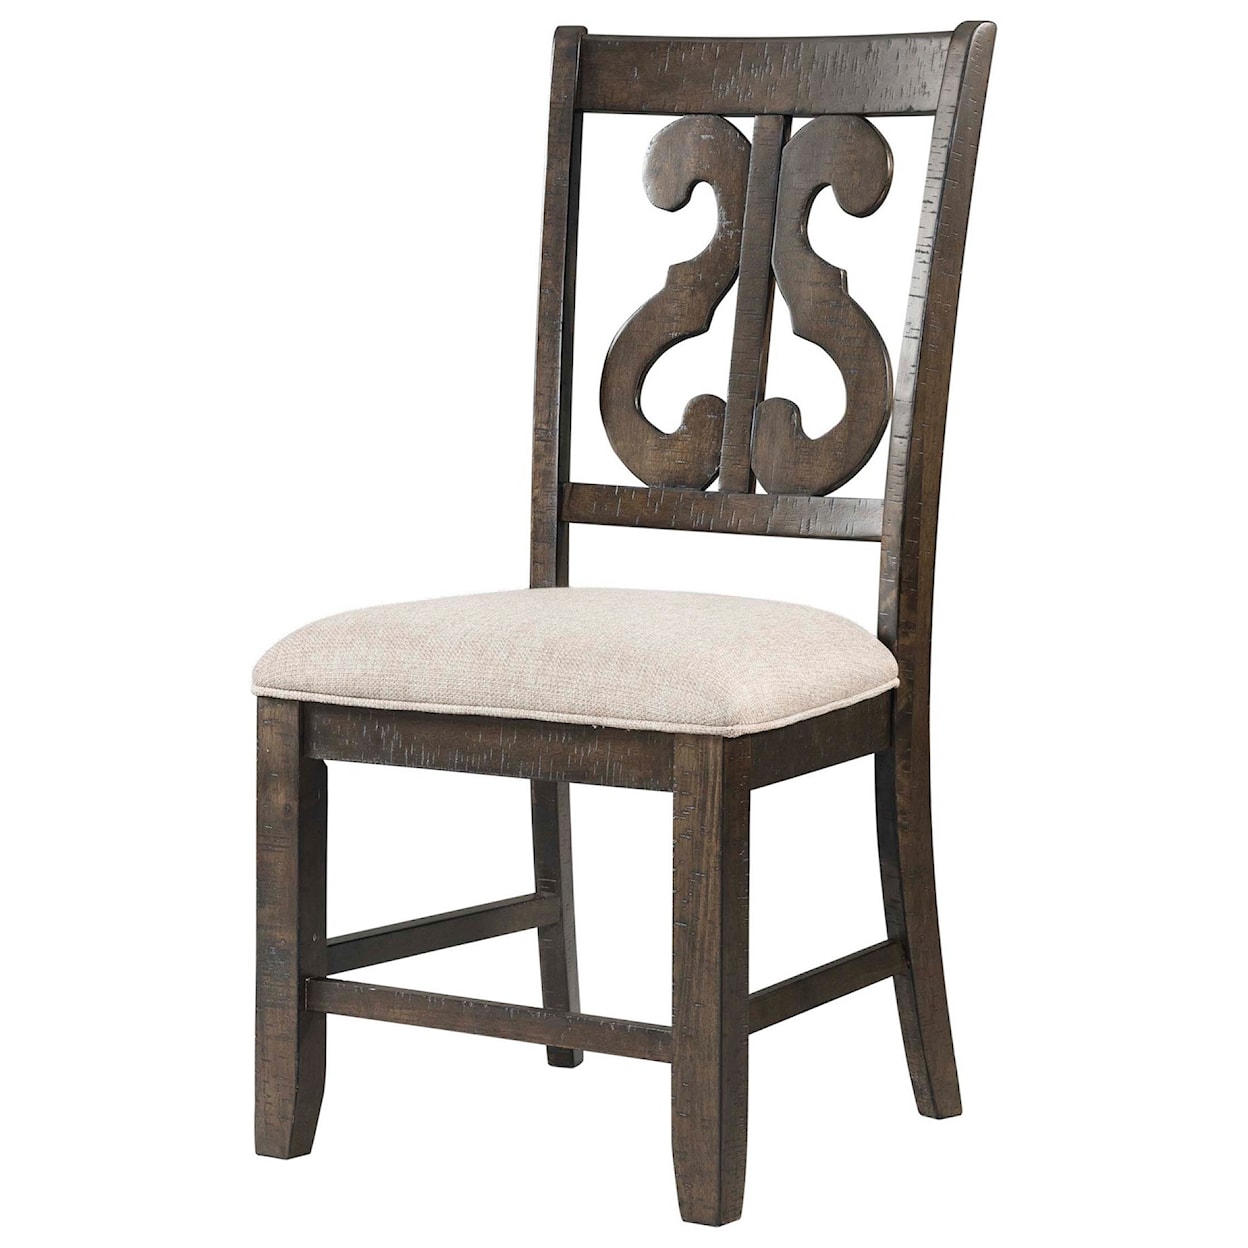 Elements International Stone 5-Piece Dining Table and Chair Set